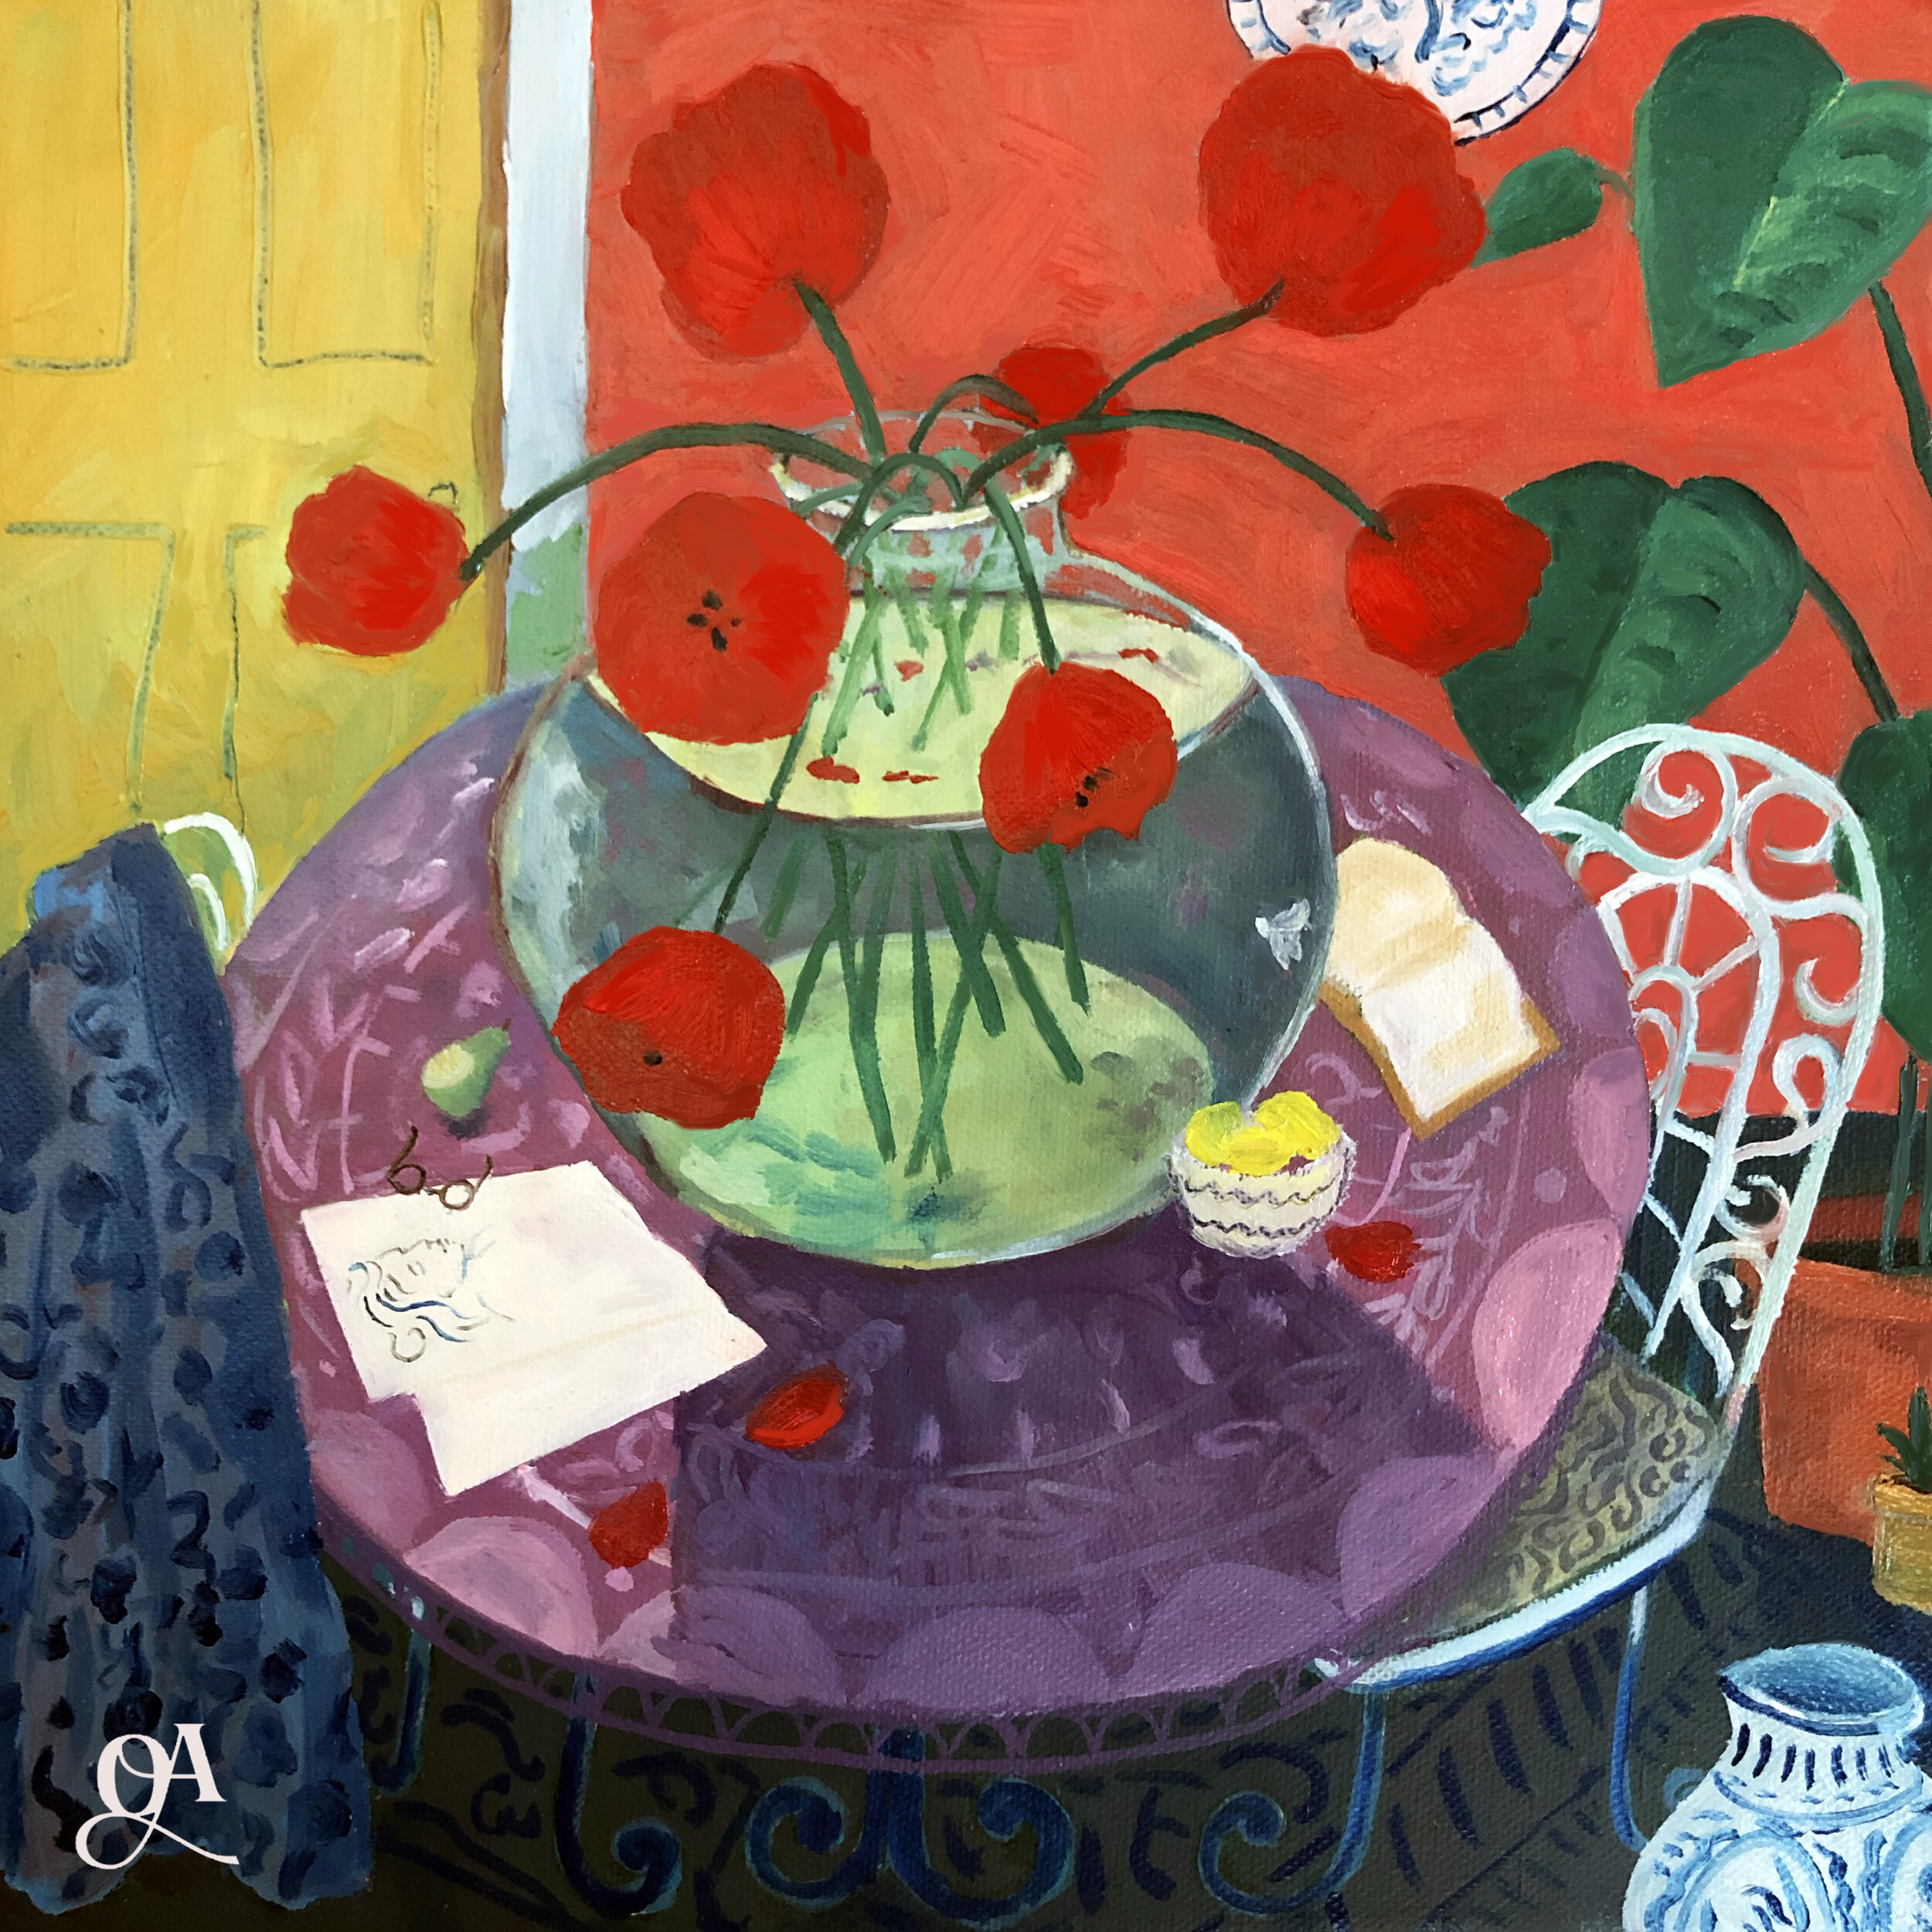 As part of the auction we have created a piece especially for this event inspired by Charleston House called ‘Poppies and a Pear’. Painted by Hattie and printed onto a silk scarf 90cm x 90cm we hope this will really help the auction, along with 165 other artworks that have been donated. The auction opens on&nbsp;1 June 2020&nbsp;on Emily’s&nbsp; Instagram account &nbsp;and bids will close at&nbsp;4pm (BST)&nbsp;on&nbsp;20 June 2020.&nbsp;Artists including Teena Vallerine, John Derian, Angie Lewin, Luke Edward Hall, Claudia Rankin, Alice Pattullo, Rory Hutton and many more have generously contributed artworks.&nbsp;  From&nbsp;1 June 2020, Emily will post each of the 165 artworks on her Instagram account with the lot number, artist bio, medium, size, postage costs and reserve (if applicable).&nbsp;  To place a bid, simply write the amount you would like to bid in £s as a comment on the Instagram post of the artwork. The final bids will be at&nbsp;4pm (BST)&nbsp;on&nbsp;20 June 2020.&nbsp;The winning bidder for each artwork will be contacted by Emily on Instagram and will be put in touch with the artist to pay any shipping costs.&nbsp;  The winning bidder will then need to pay for their artwork(s) by making a payment to Charleston’s&nbsp; Emergency Appeal &nbsp;and sending a receipt to the artist. Please do not opt to add Gift Aid to your payment as Charleston is not able to claim Gift Aid on auction sales.&nbsp;  Once the artist has received the shipping costs and the receipt they will send the artwork to the winning bidder.&nbsp;   You can also donate any amount you’d like here.